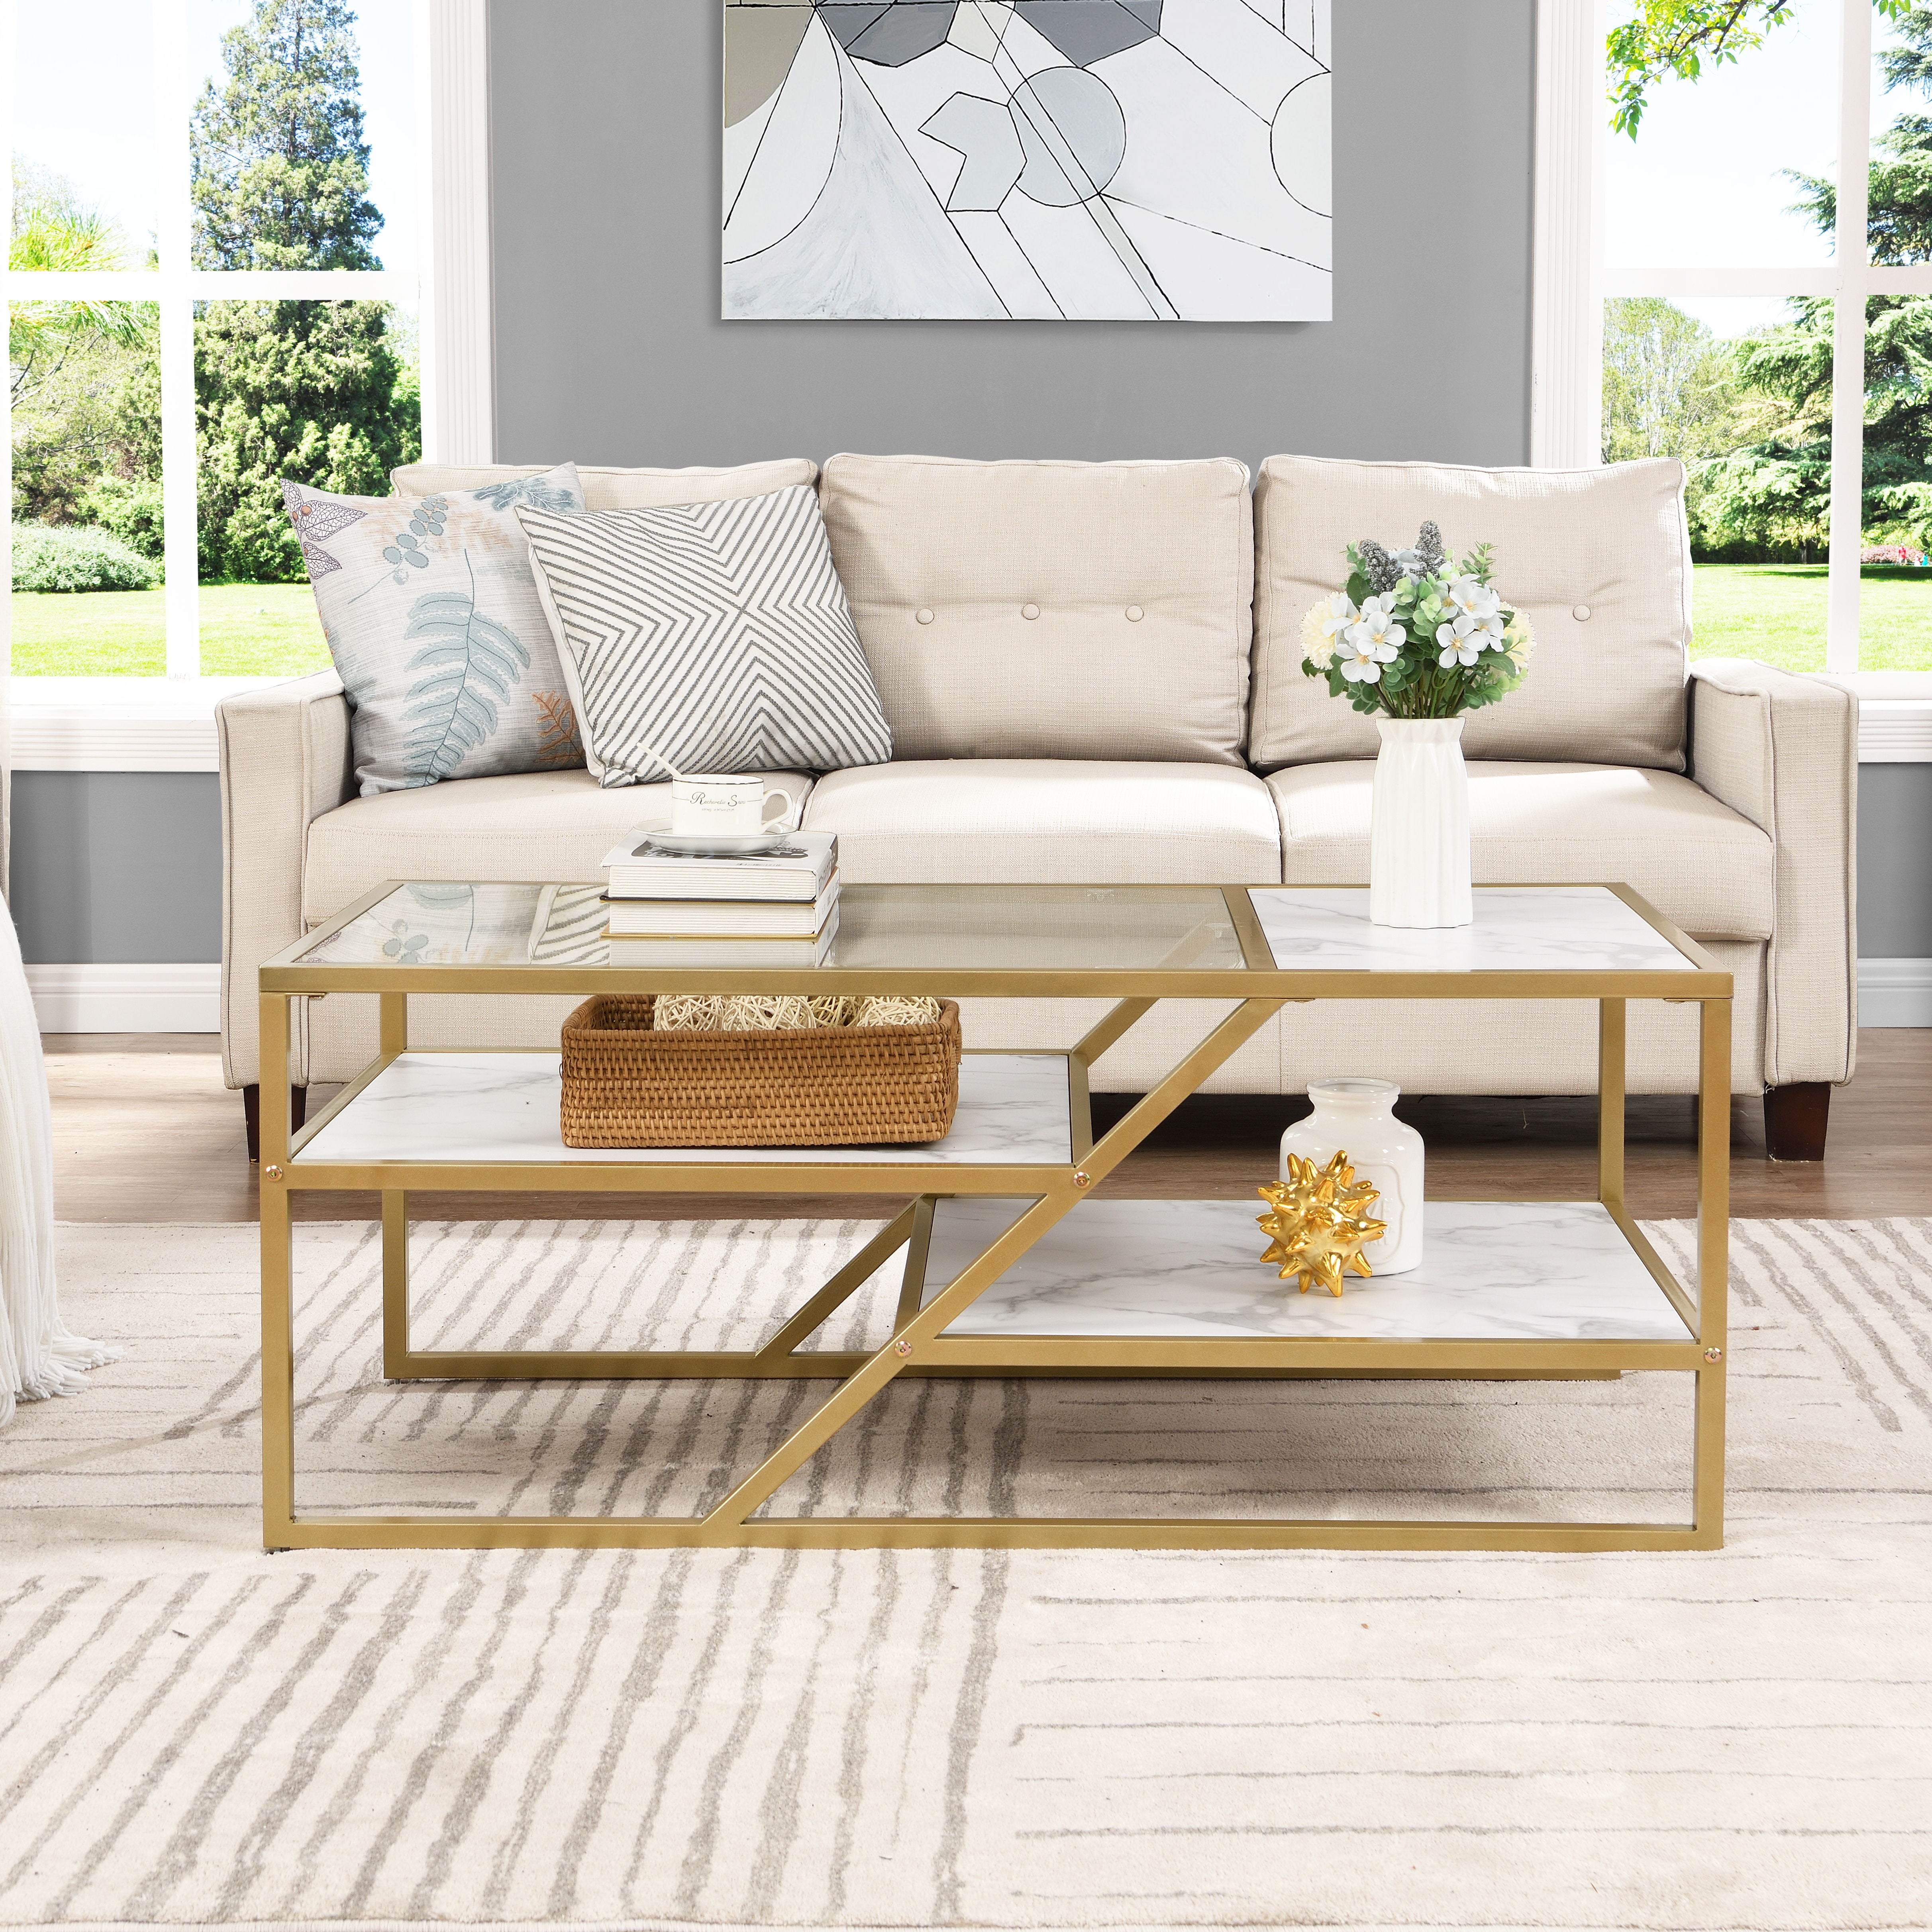 Golden Coffee Table With Storage Shelf, Tempered Glass Coffee Table With Metal Frame For Living Room & Bedroom